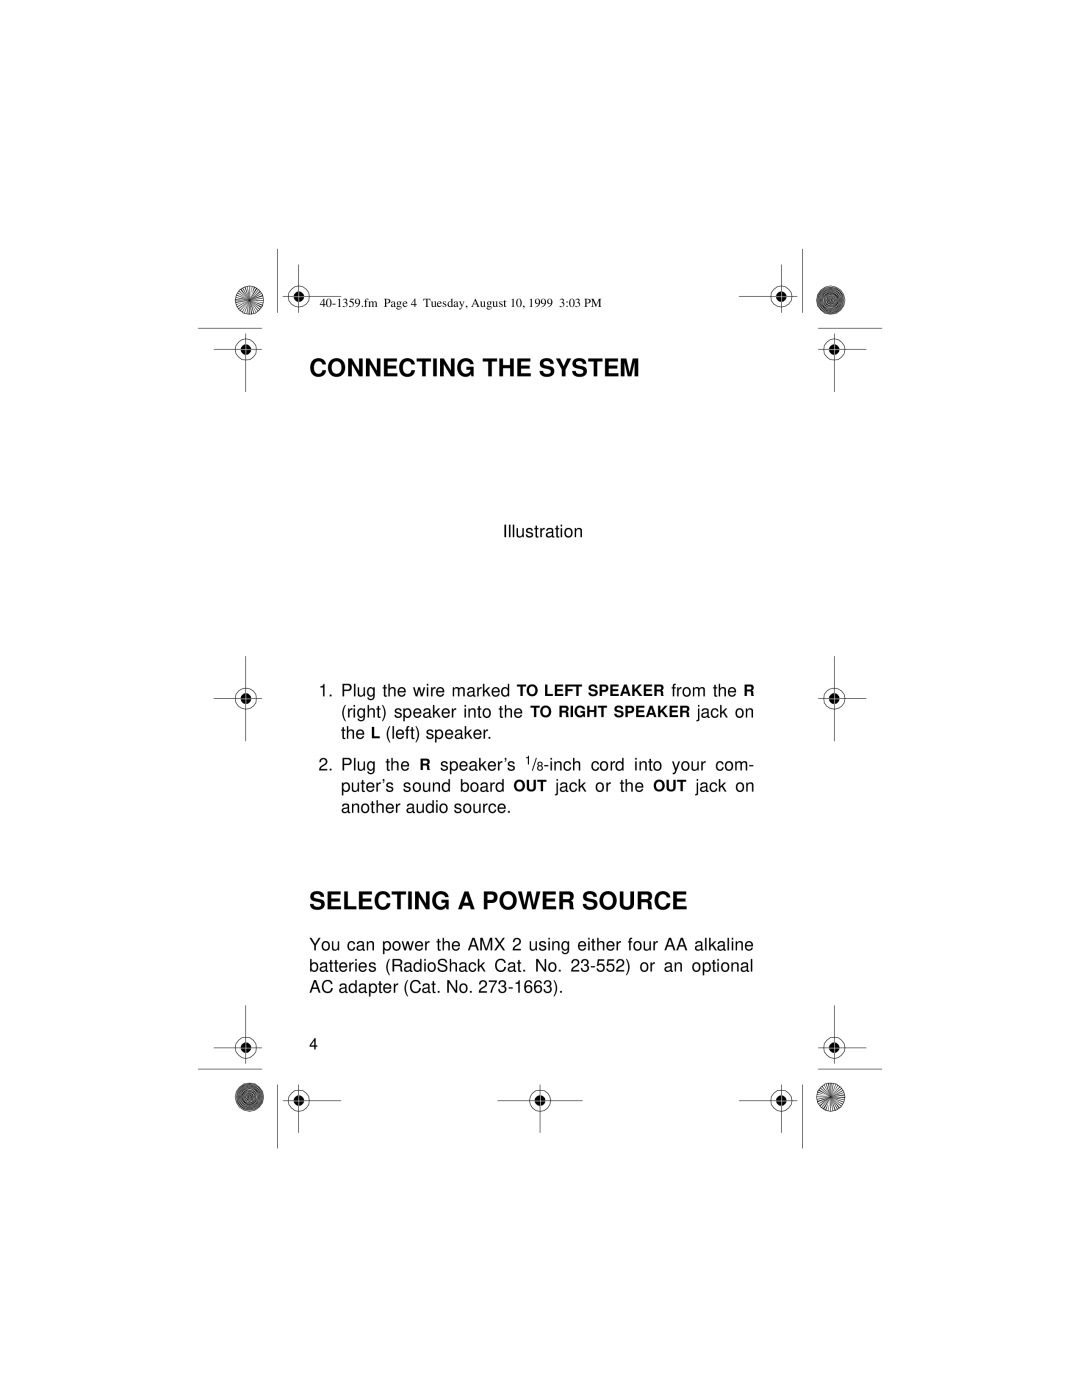 Panasonic AMX 2 owner manual Connecting The System, Selecting A Power Source 